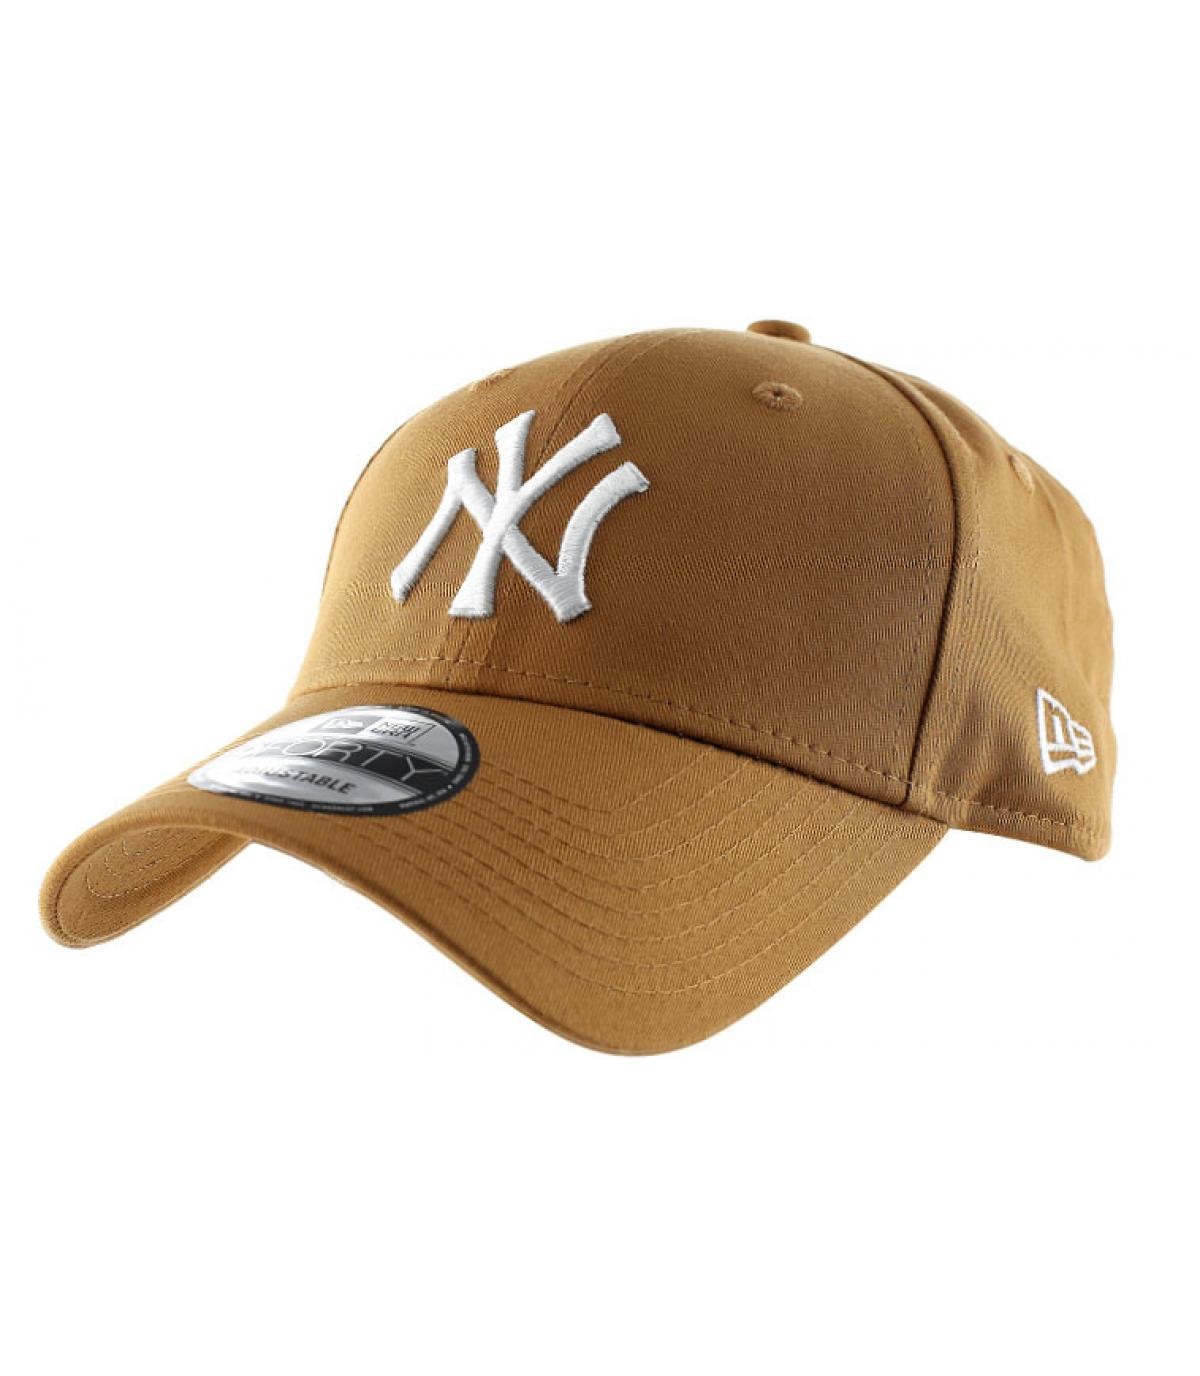 NY league essential 9forty wheat cap New Era